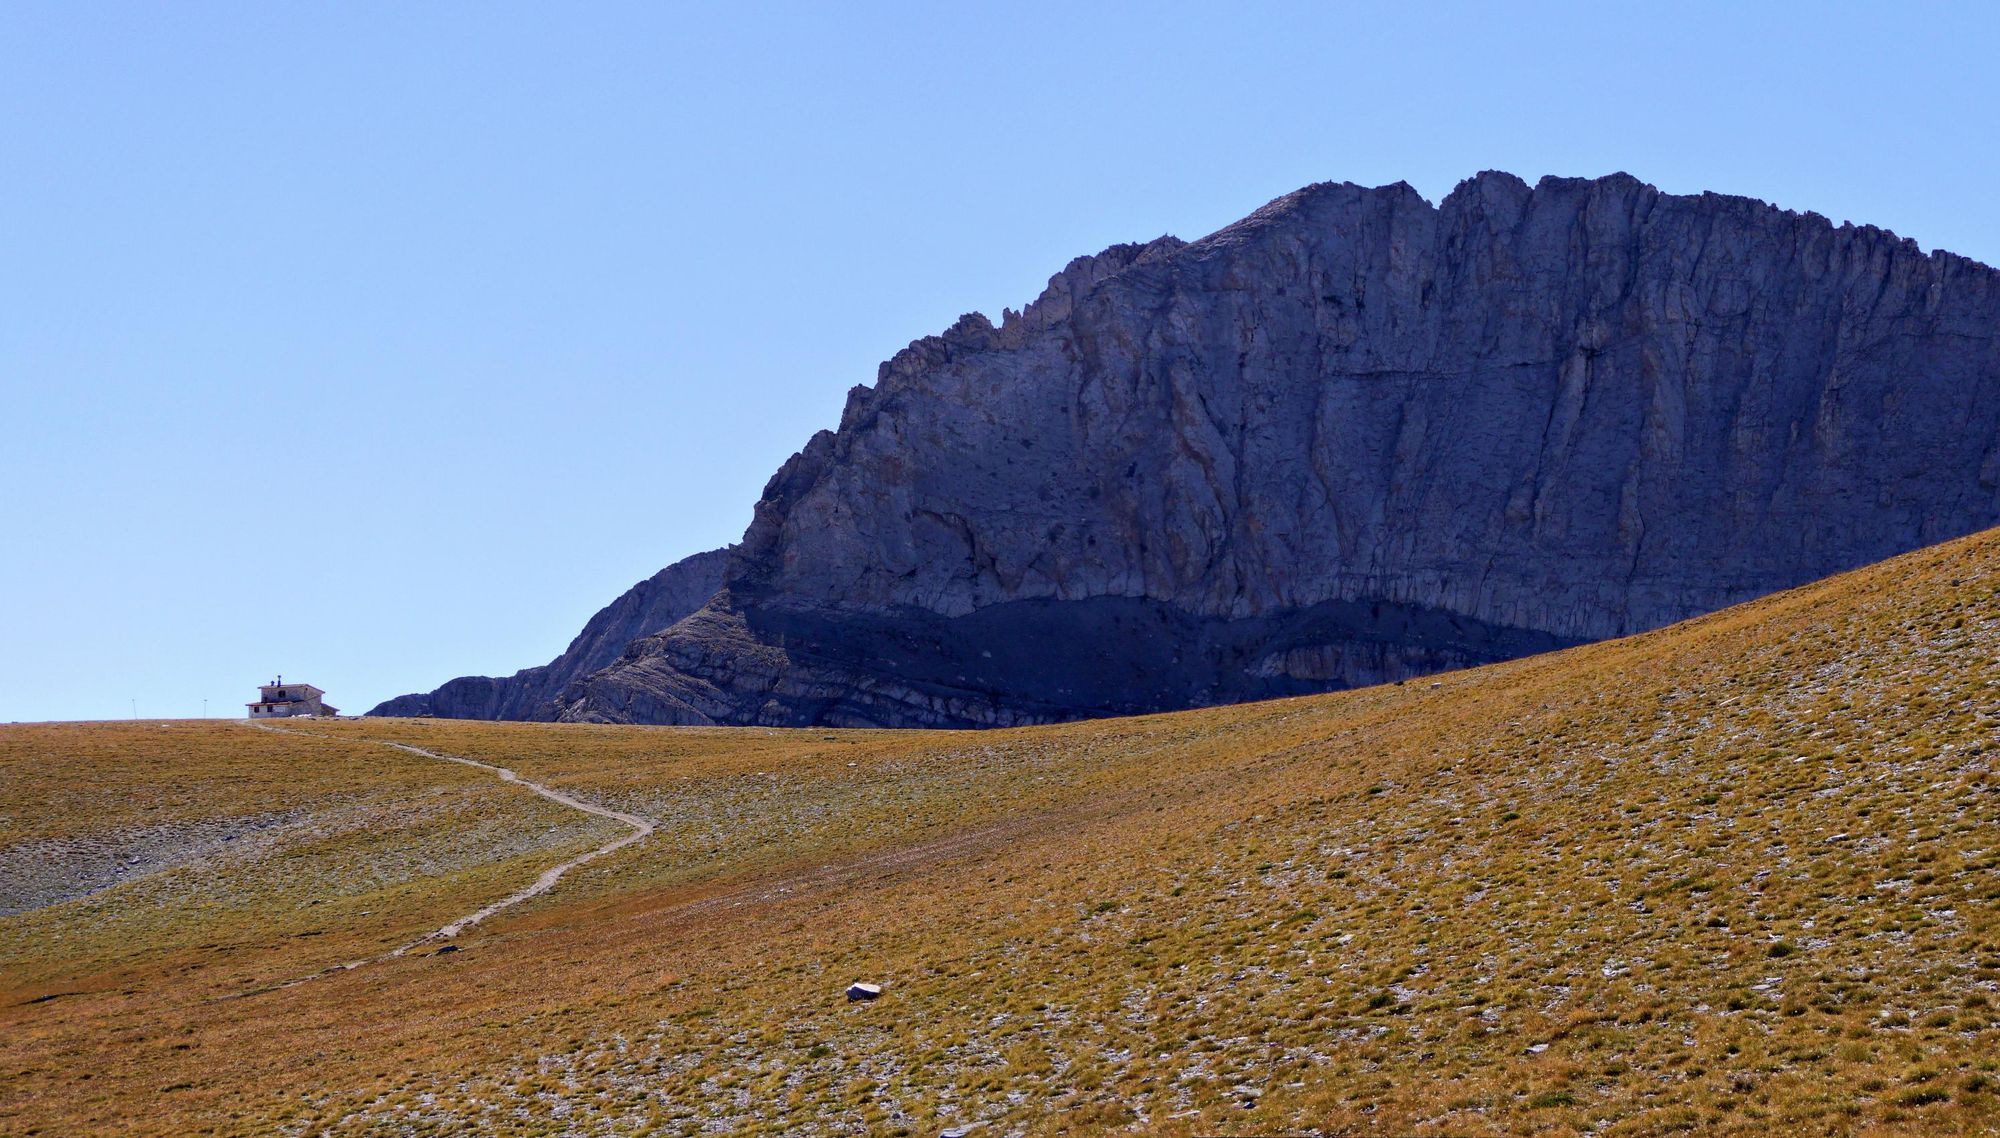 The winding route up to the Christos Kakkalos Mountain Refuge. Photo: Getty